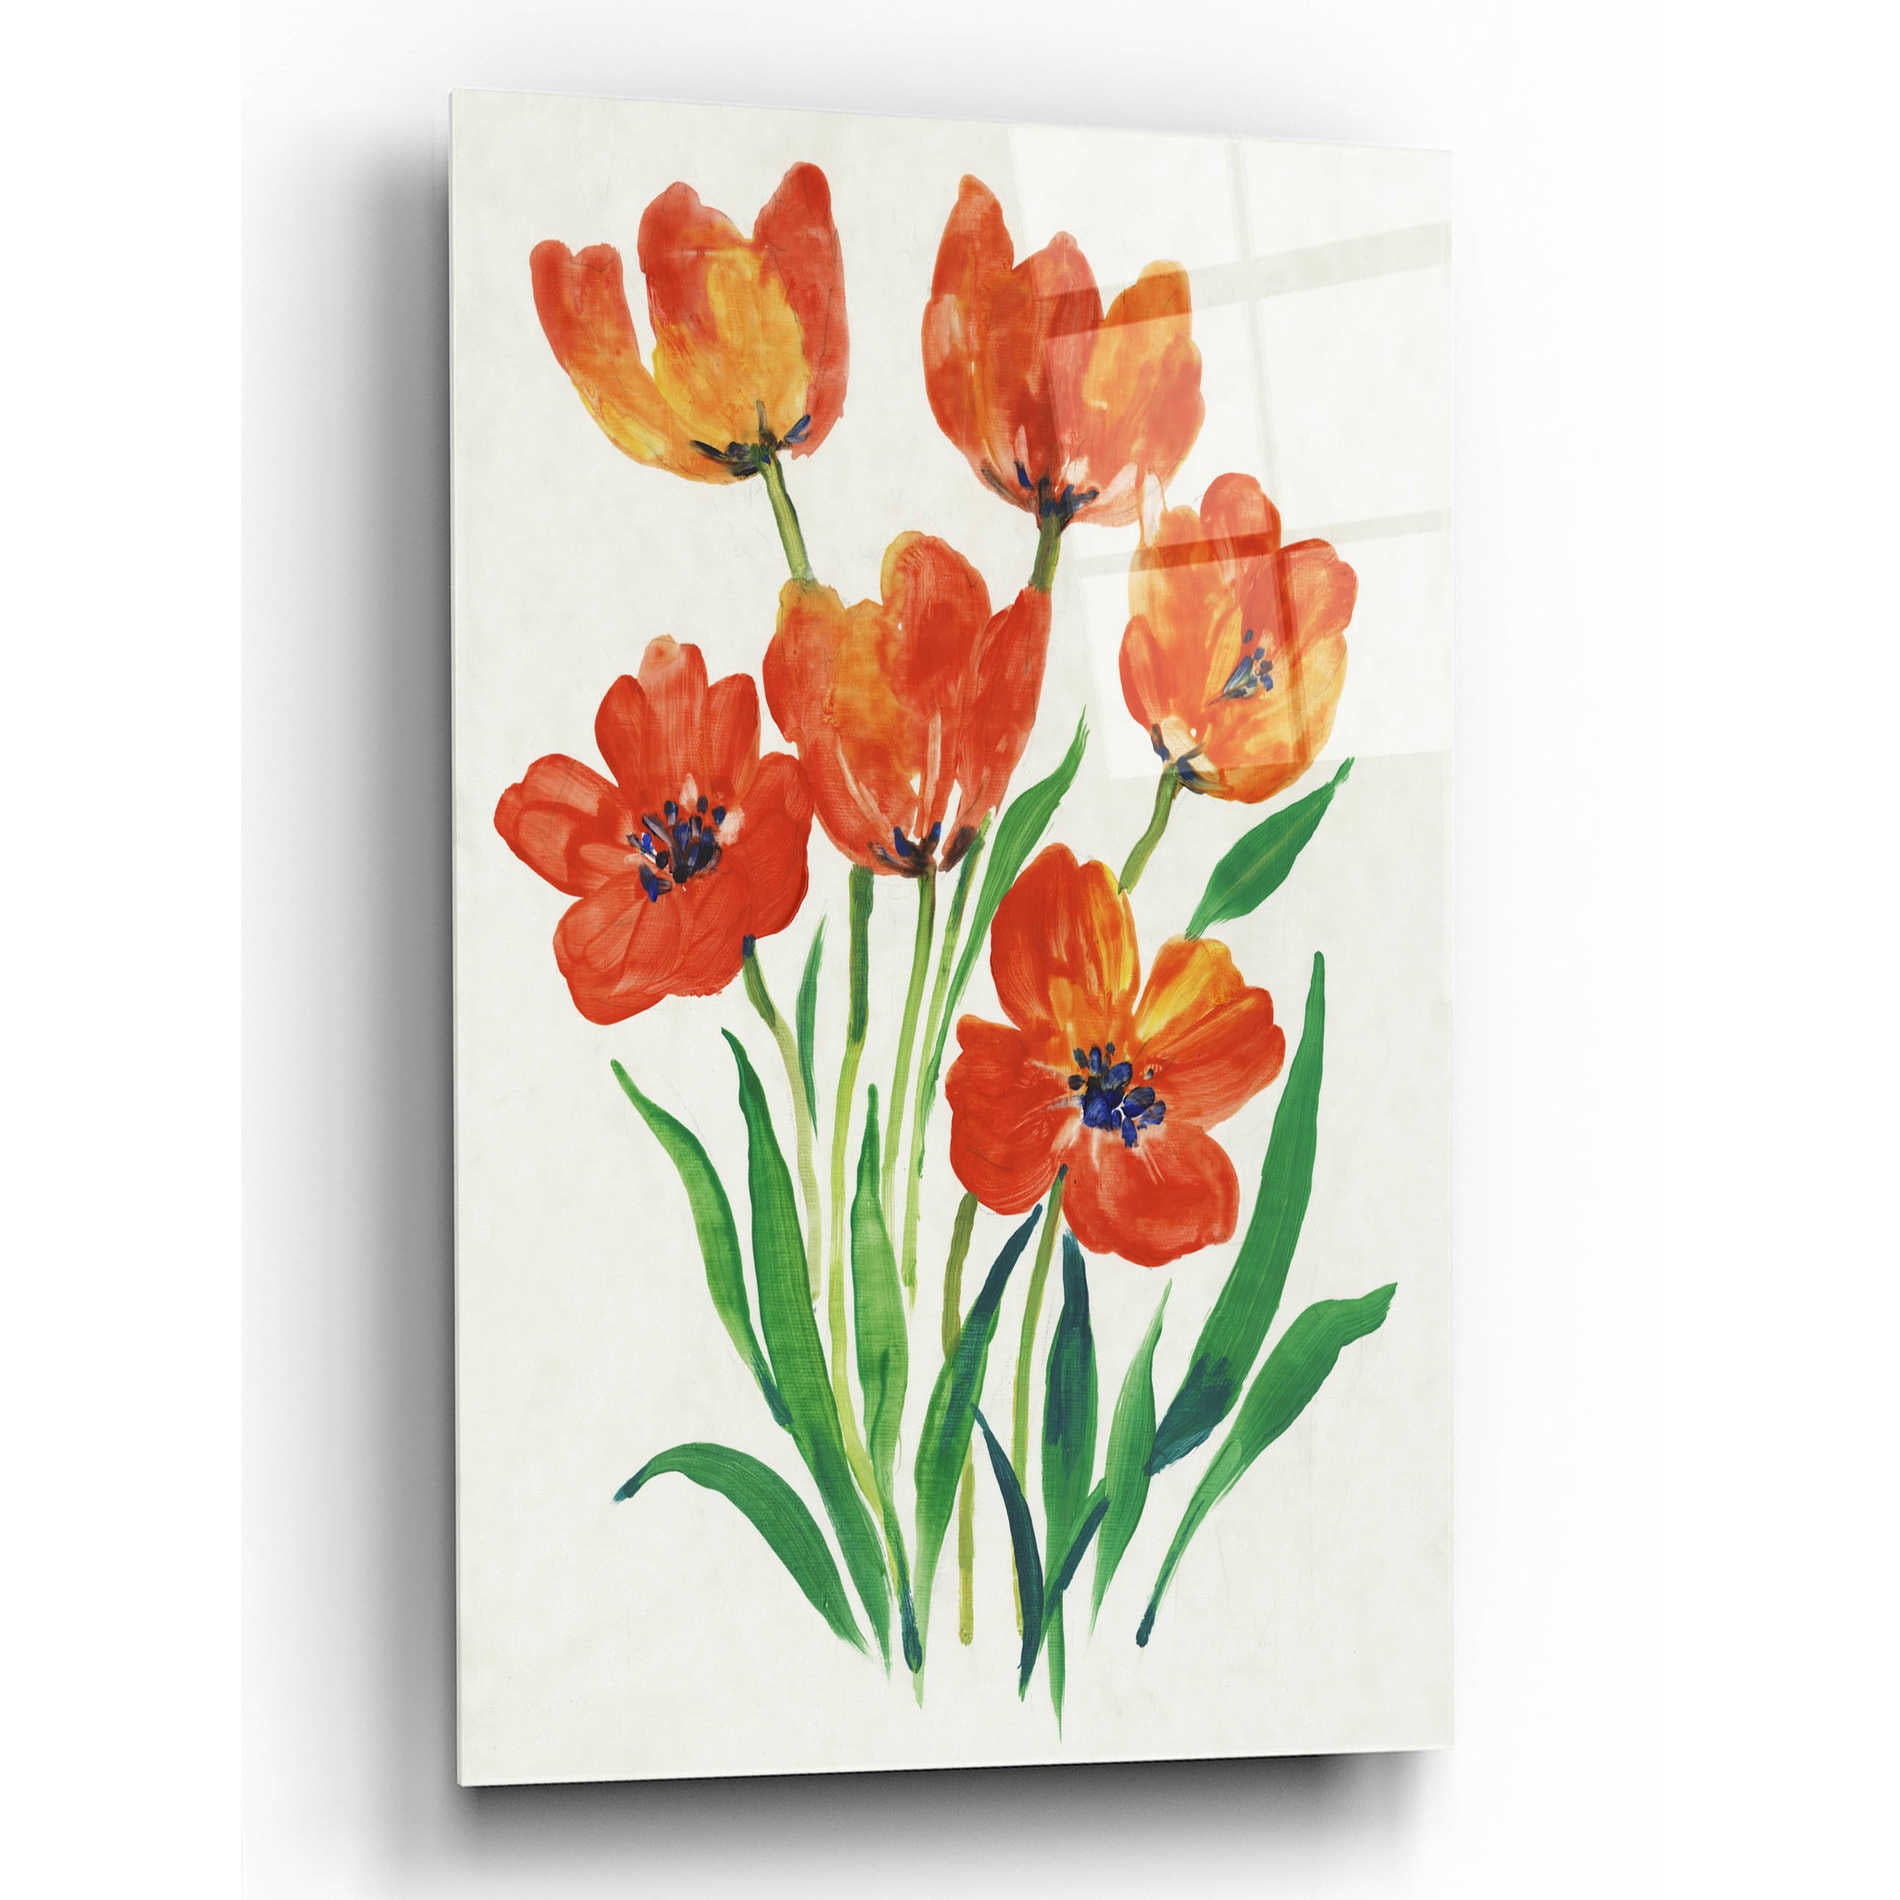 Epic Art 'Red Tulips in Bloom II' by Tim O'Toole, Acrylic Glass Wall Art,16x24